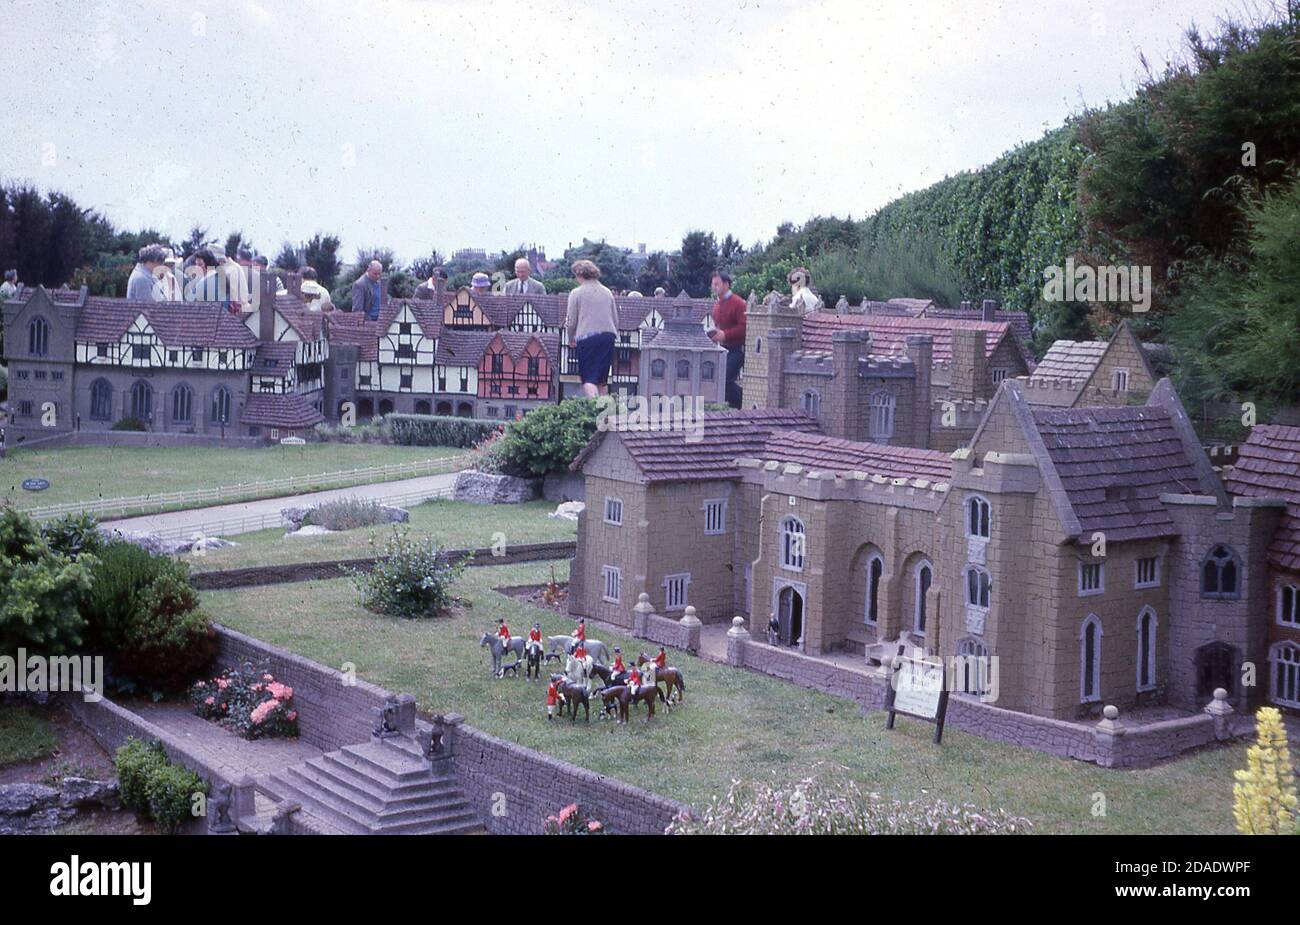 1960s, historical photo Model Village in White Rock Gardens, Hastings, E. Sussex, England, UK and a view of Callis Court Manor in miniature scale.  Designed by Stanley Deboo and opened in 1955, the village was constructed by Benjamin White, following the successful one he had bult in Ramsgate. The model village in Hastings was named 'Ganymeade' and featured small scale reproductions of many famous Sussex buildings. Although popular, it was removed in 1998 due to vandalism issues. Stock Photo